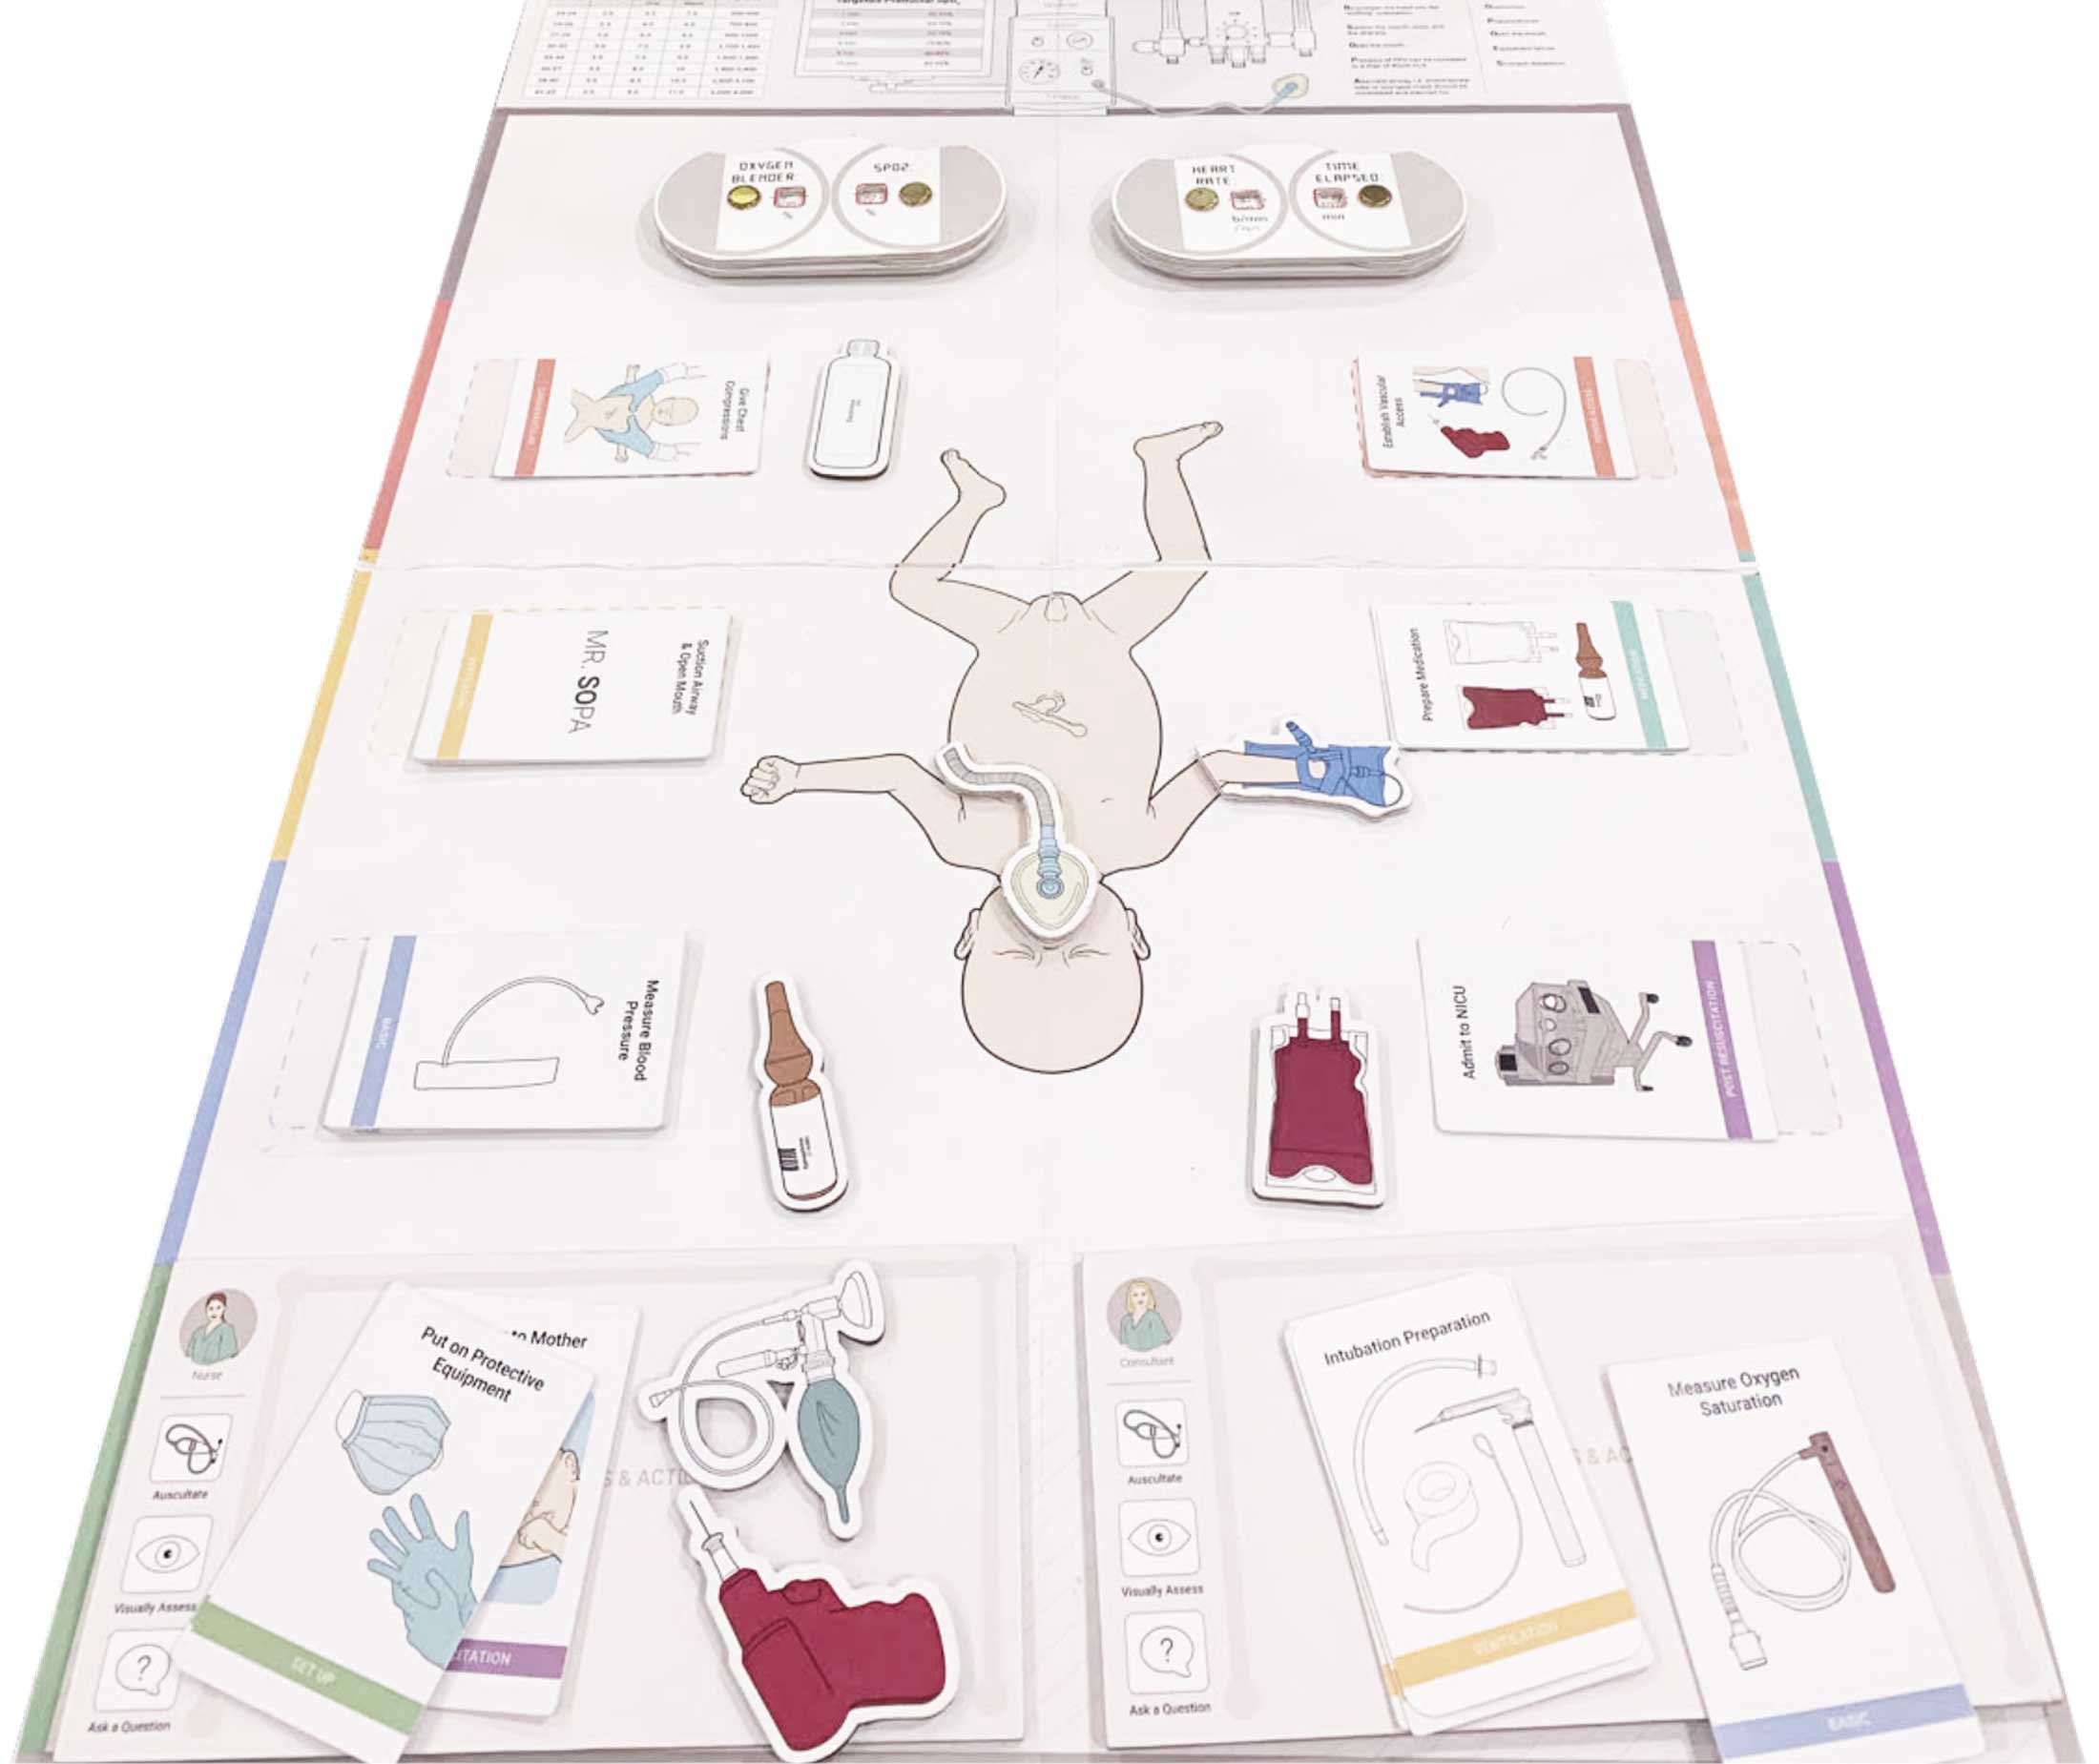 Board game laid out on a table, including cards showing tasks and events surrounding birth, equipment to attach to the newborn, and support staff to manage